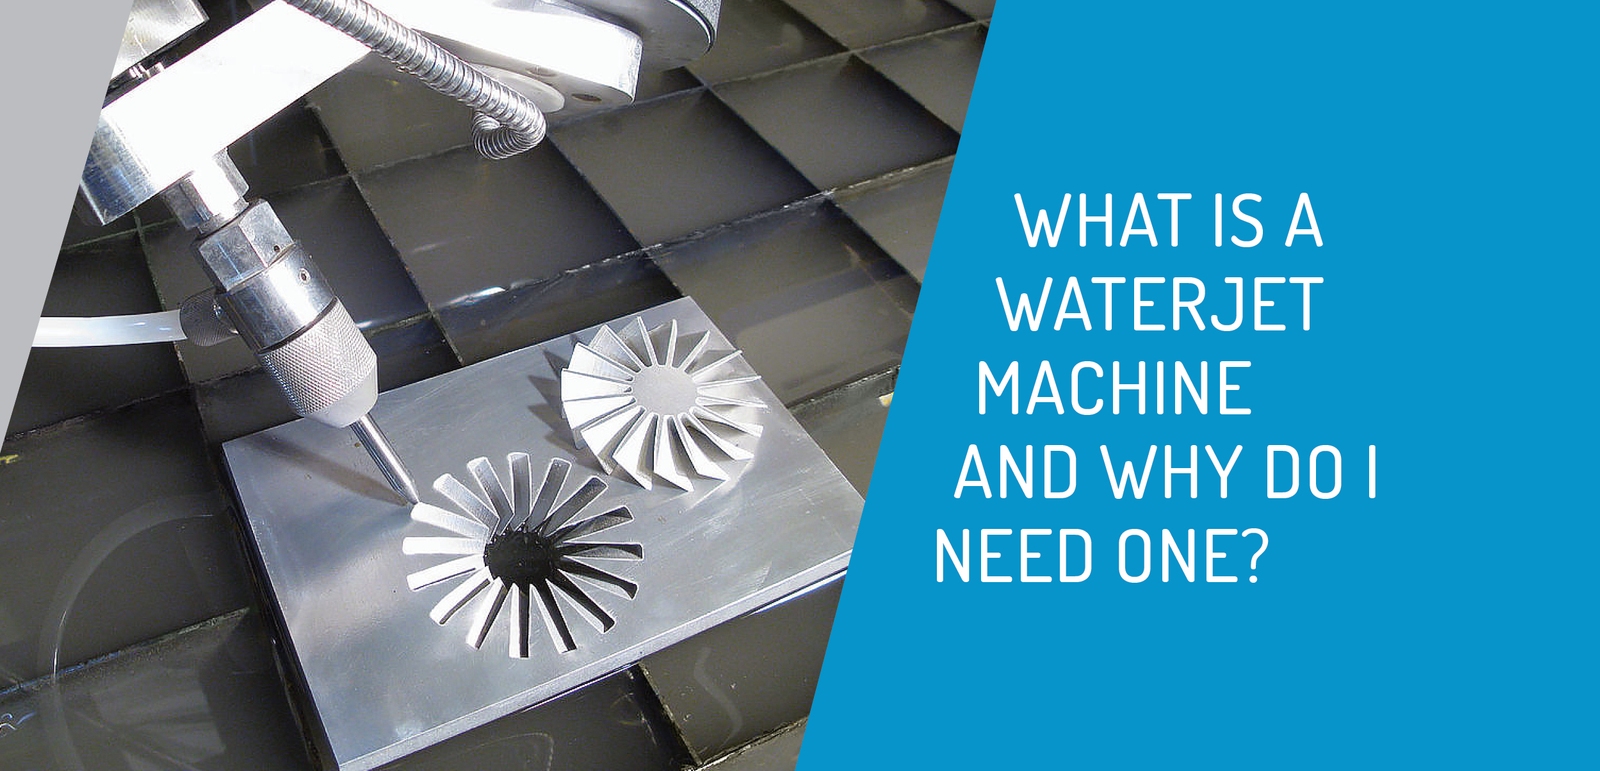 What is a Waterjet Cutting Machine and Why Do I Need One?